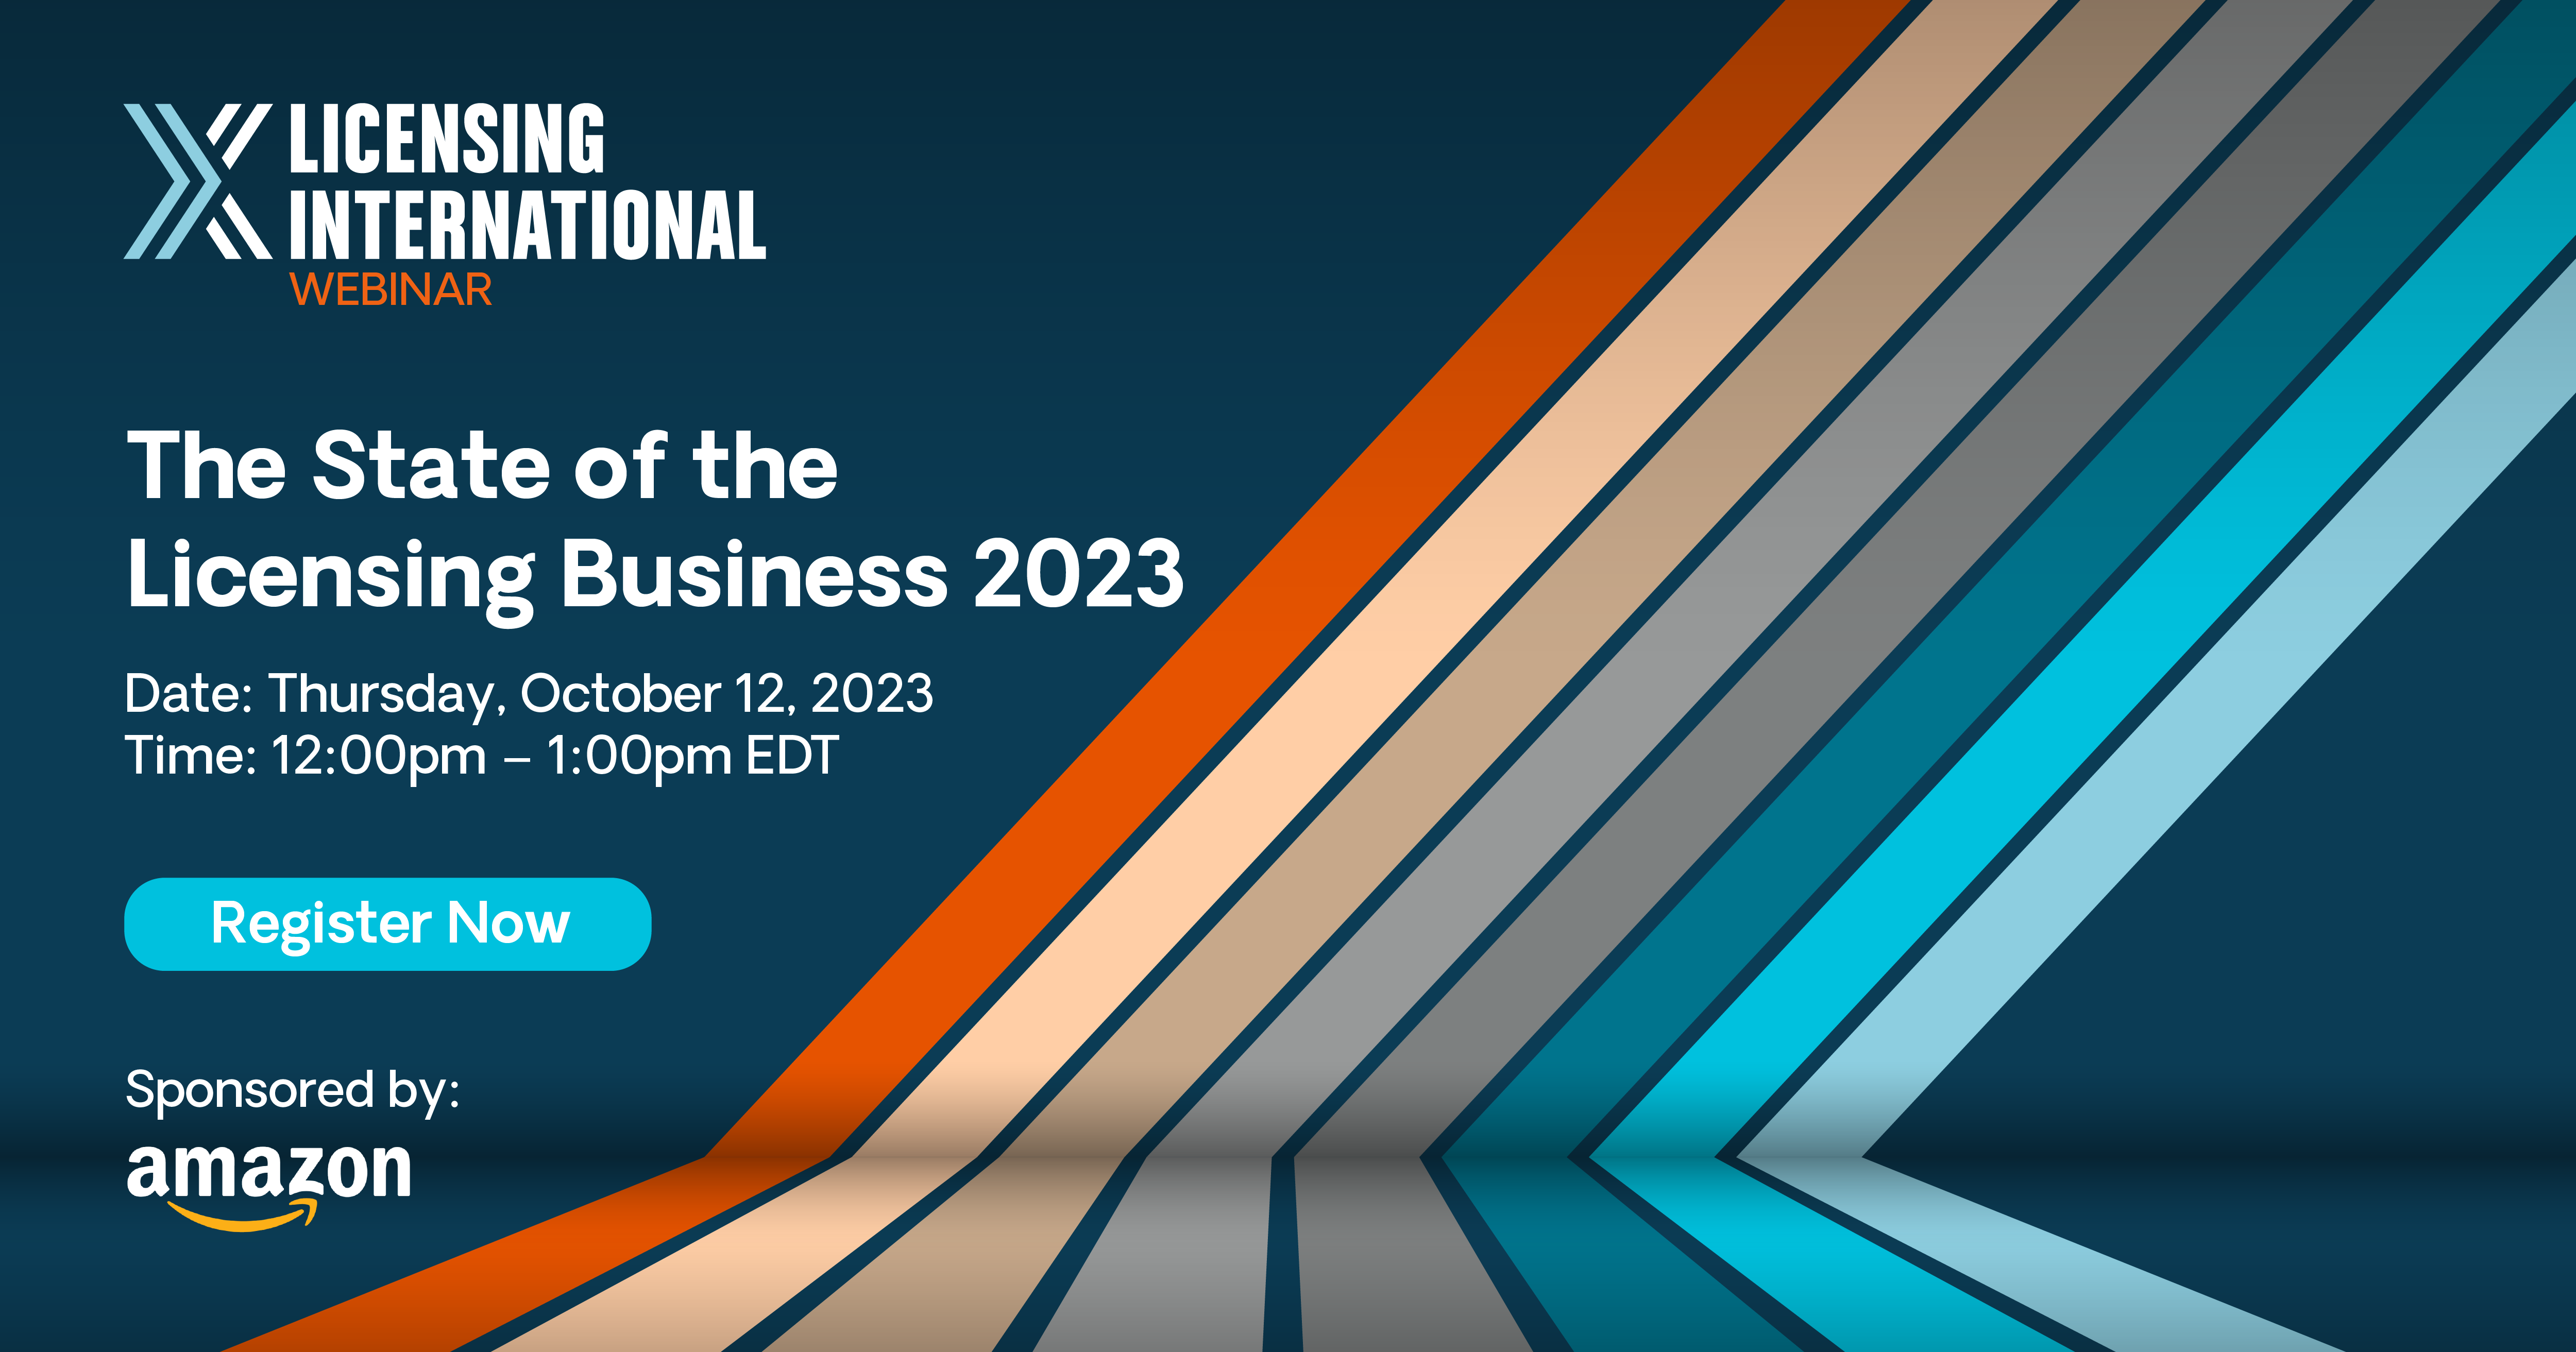 The State of the Licensing Business 2023 image